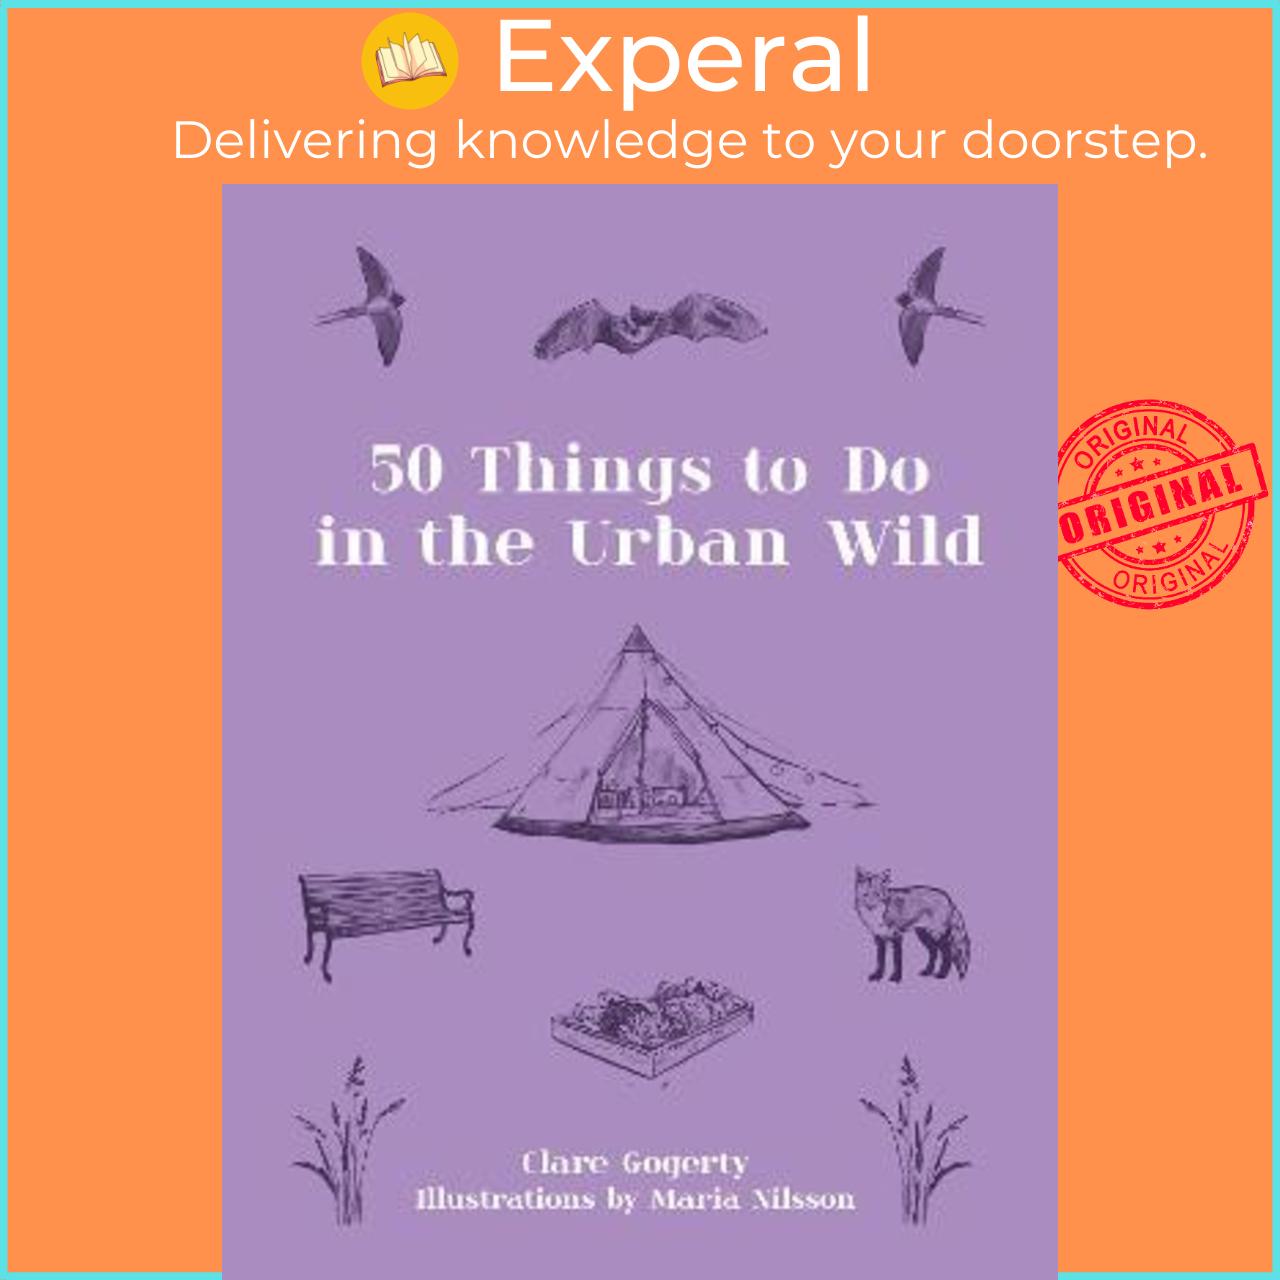 Sách - 50 Things to Do in the Urban Wild by Clare Gogerty (UK edition, hardcover)